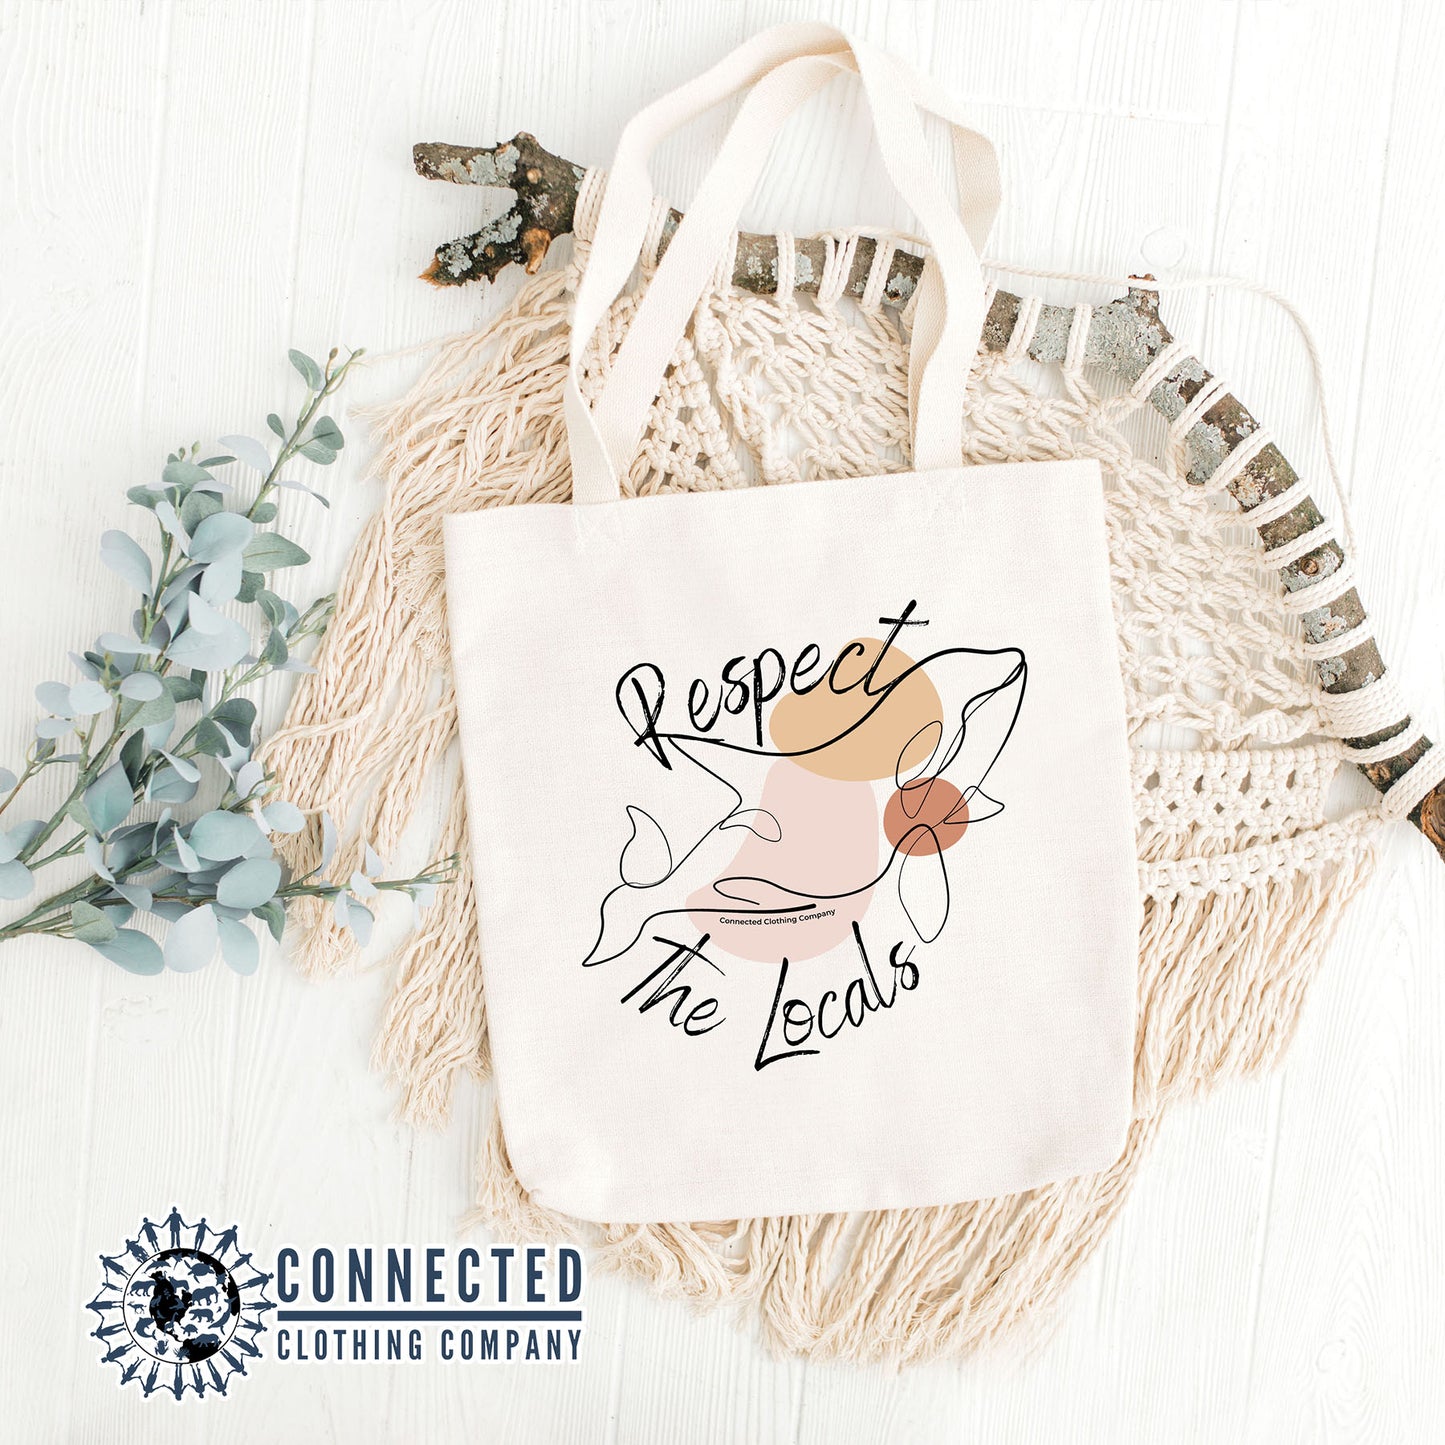 Respect The Locals Orca Tote Bag - architectconstructor - 10% of proceeds donated to killer whale conservation